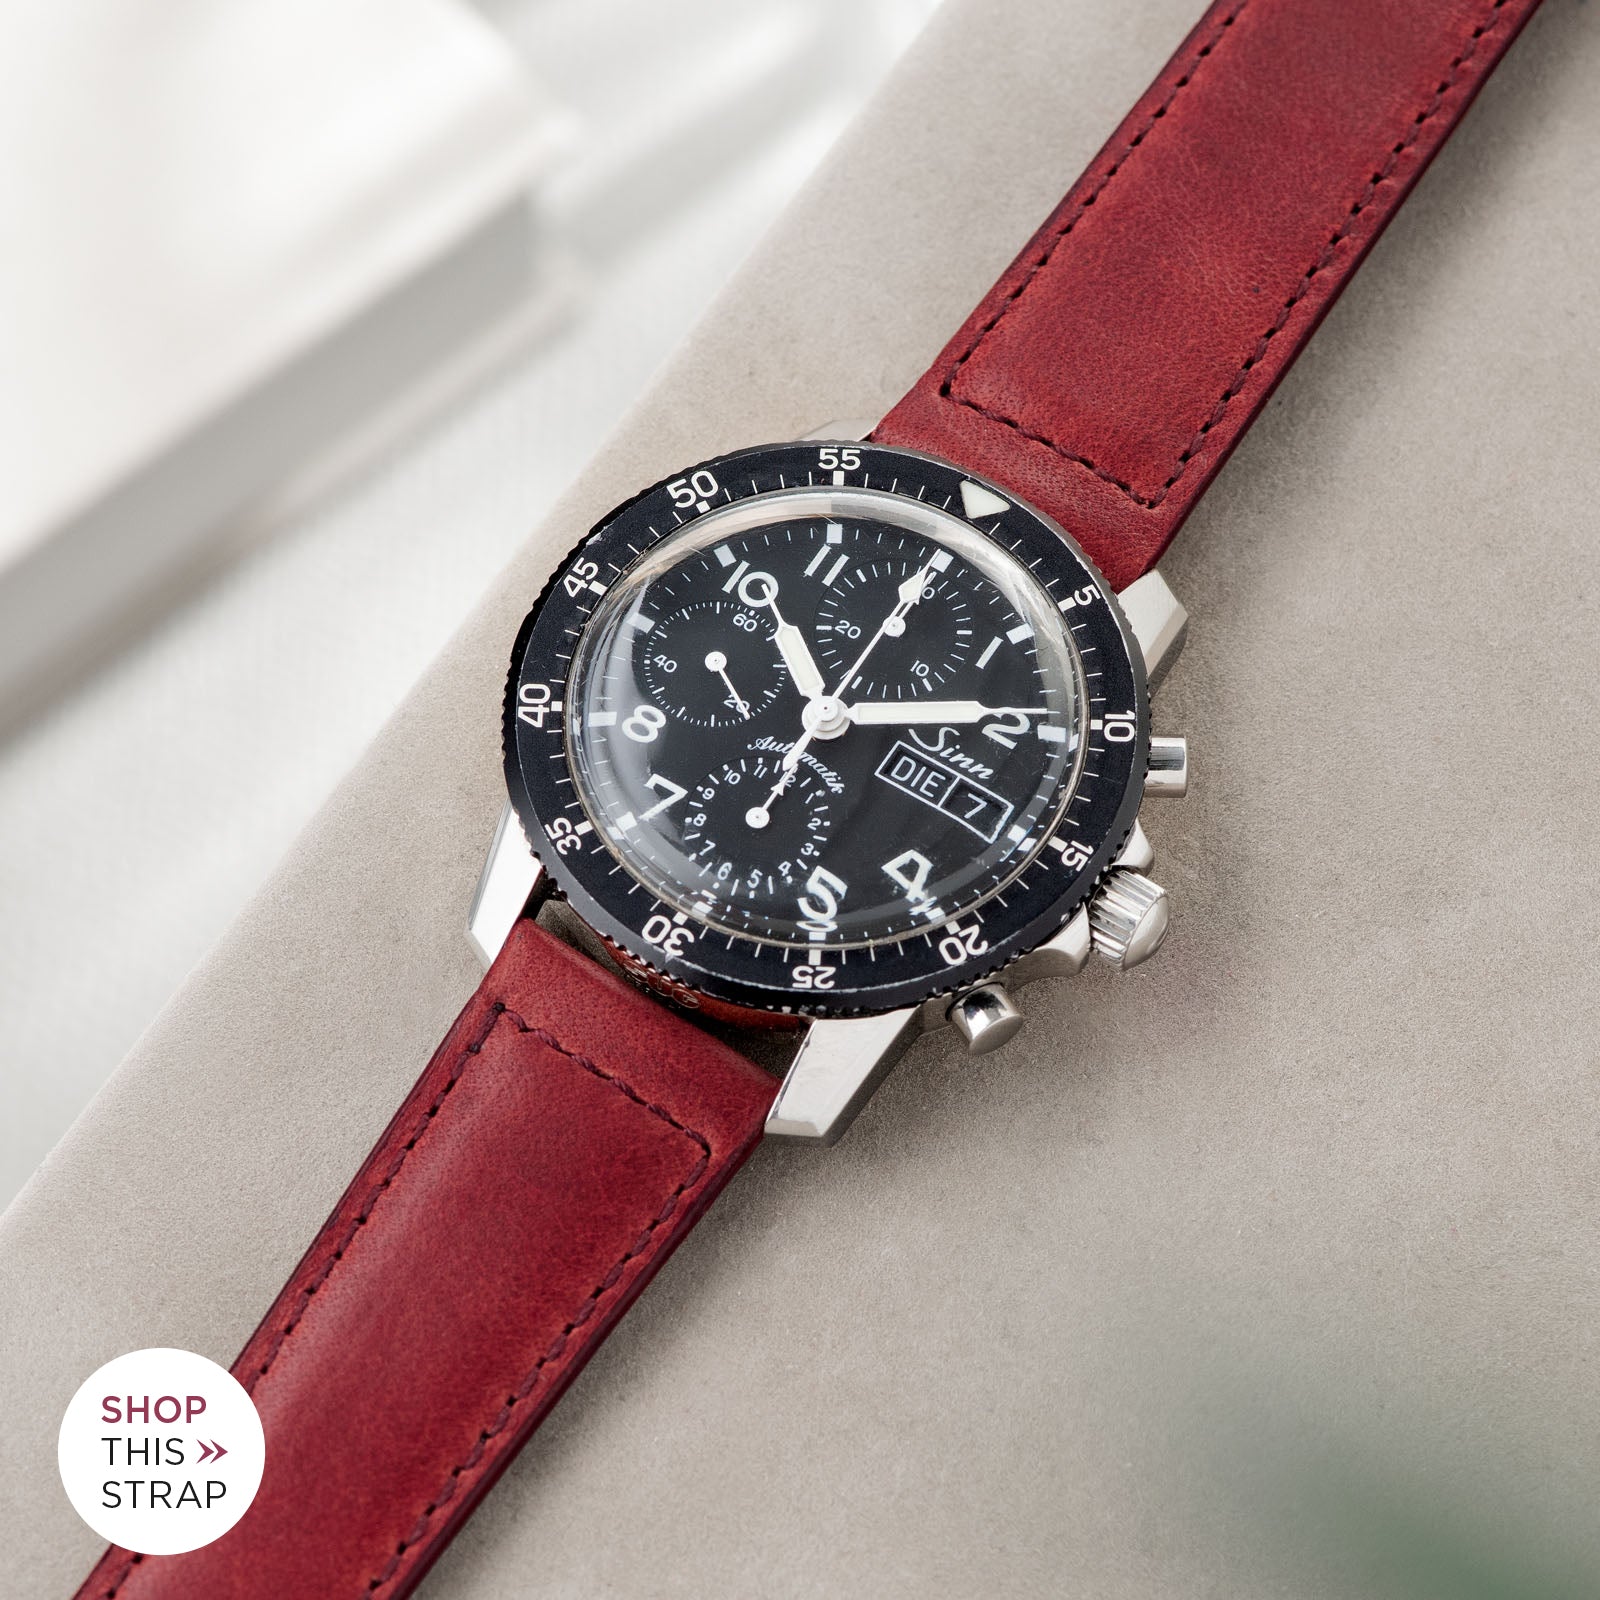 Bulang and Sons_Strap Guide_Sinn 103St Flieder Chronograph_Chimney Red Leather Watch Strap